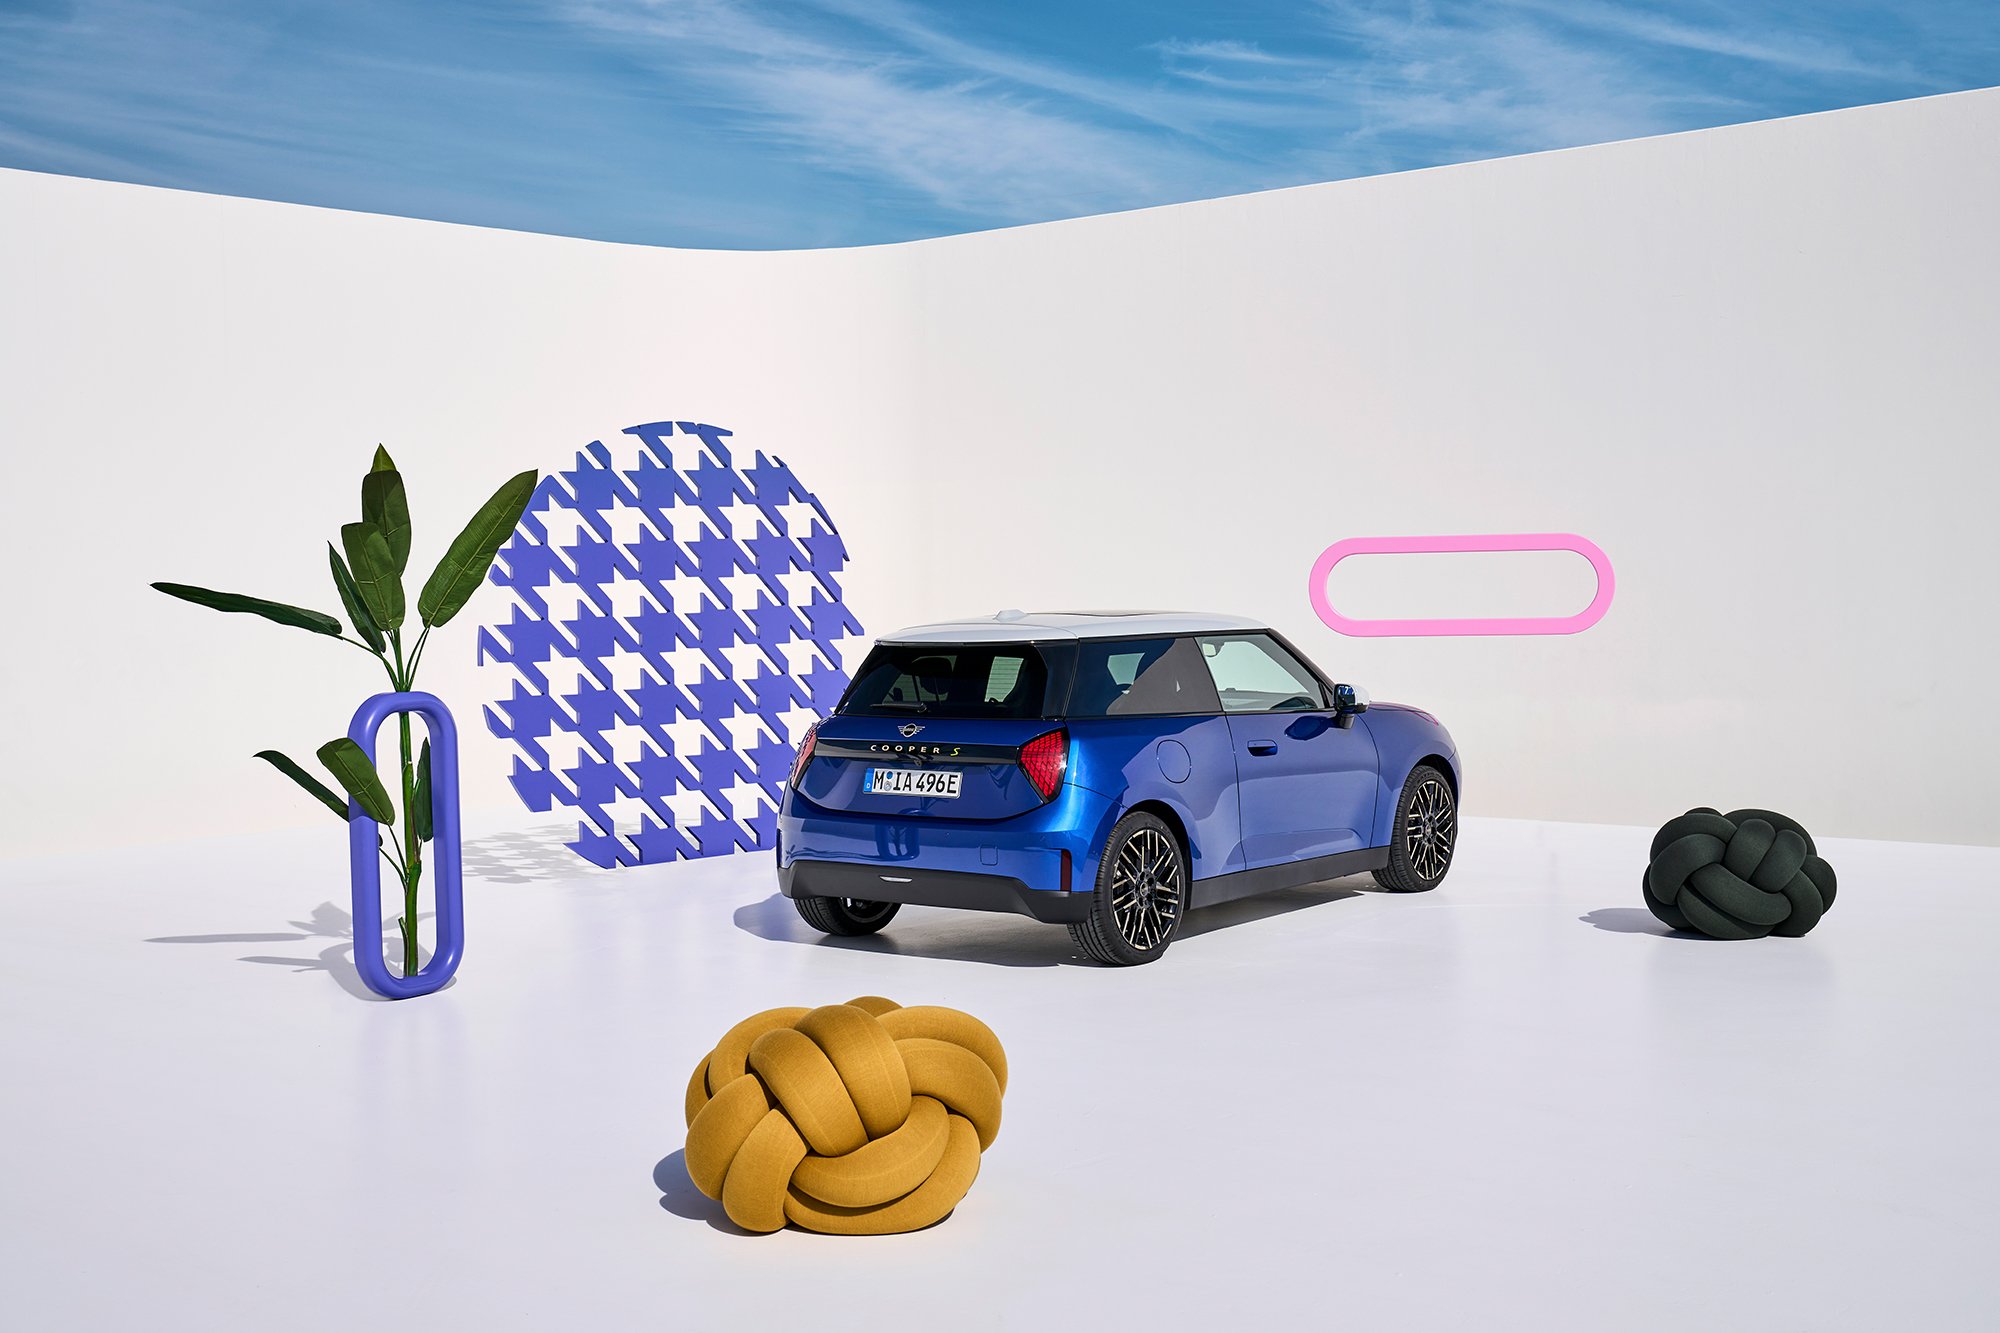 The rear design of the new all-electric MINI Cooper Electric